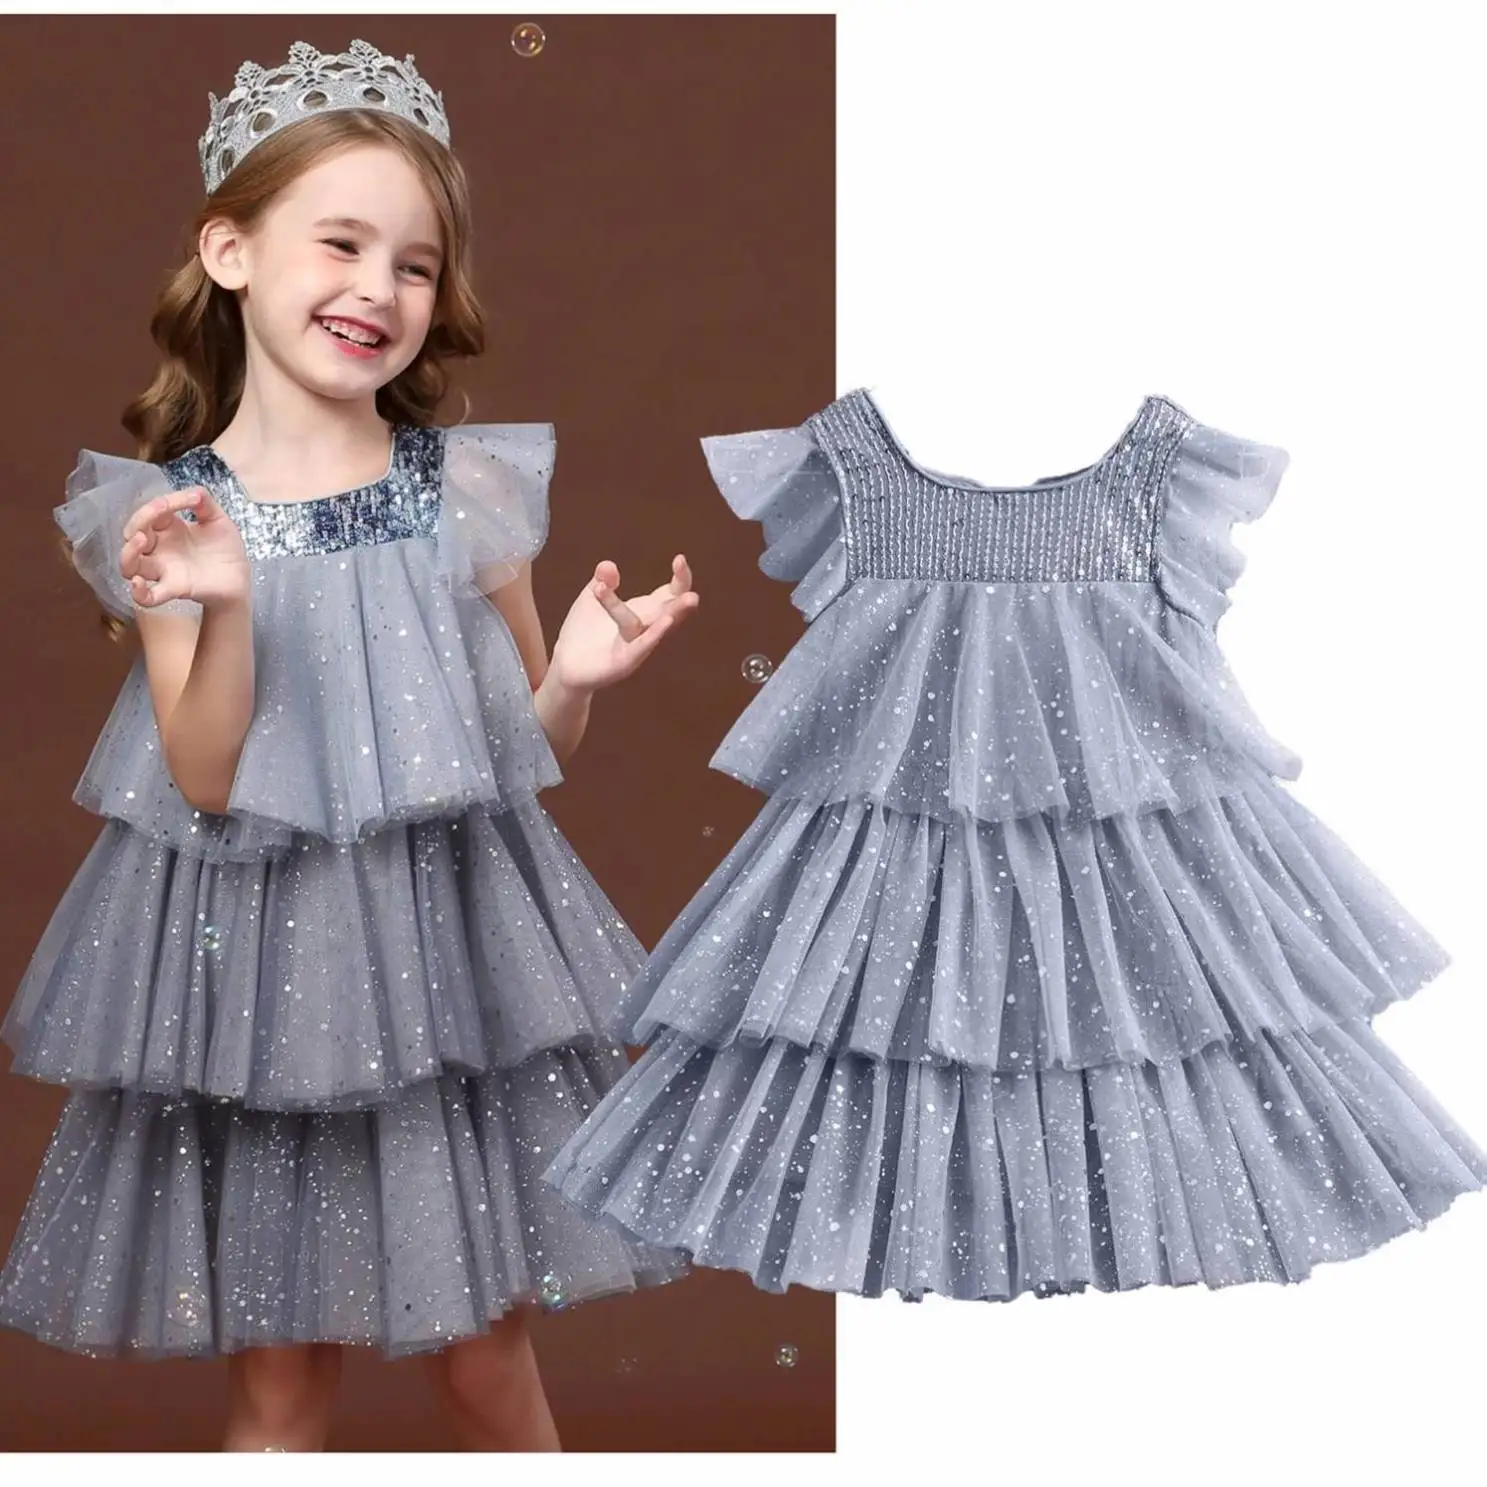 

COLORFUL Girls Sequin Tutu Lace Mesh Birthday Prom Toddler Baby Kids Elegant Wedding Party Dress Clothes Dresses